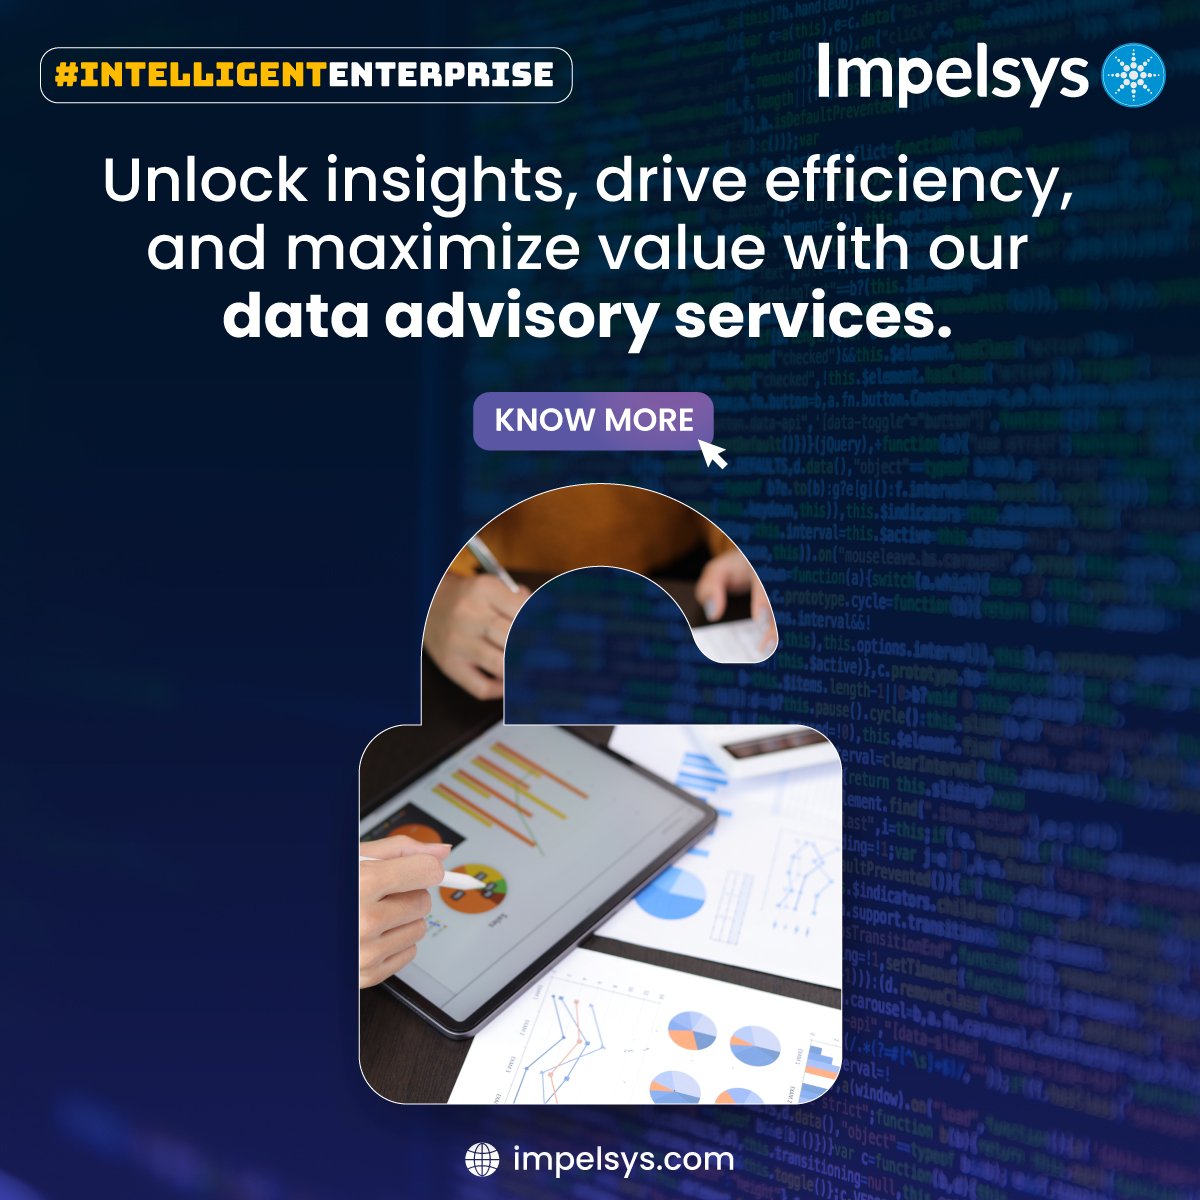 Our #dataadvisory services offer a comprehensive suite of solutions, guiding organizations towards optimal #datautilization and value creation. Know more at: impelsys.com/services/data-…

#Impelsys #IntelligentEnterprise #DataAnalytics #DataDriven #PredictiveAnalytics